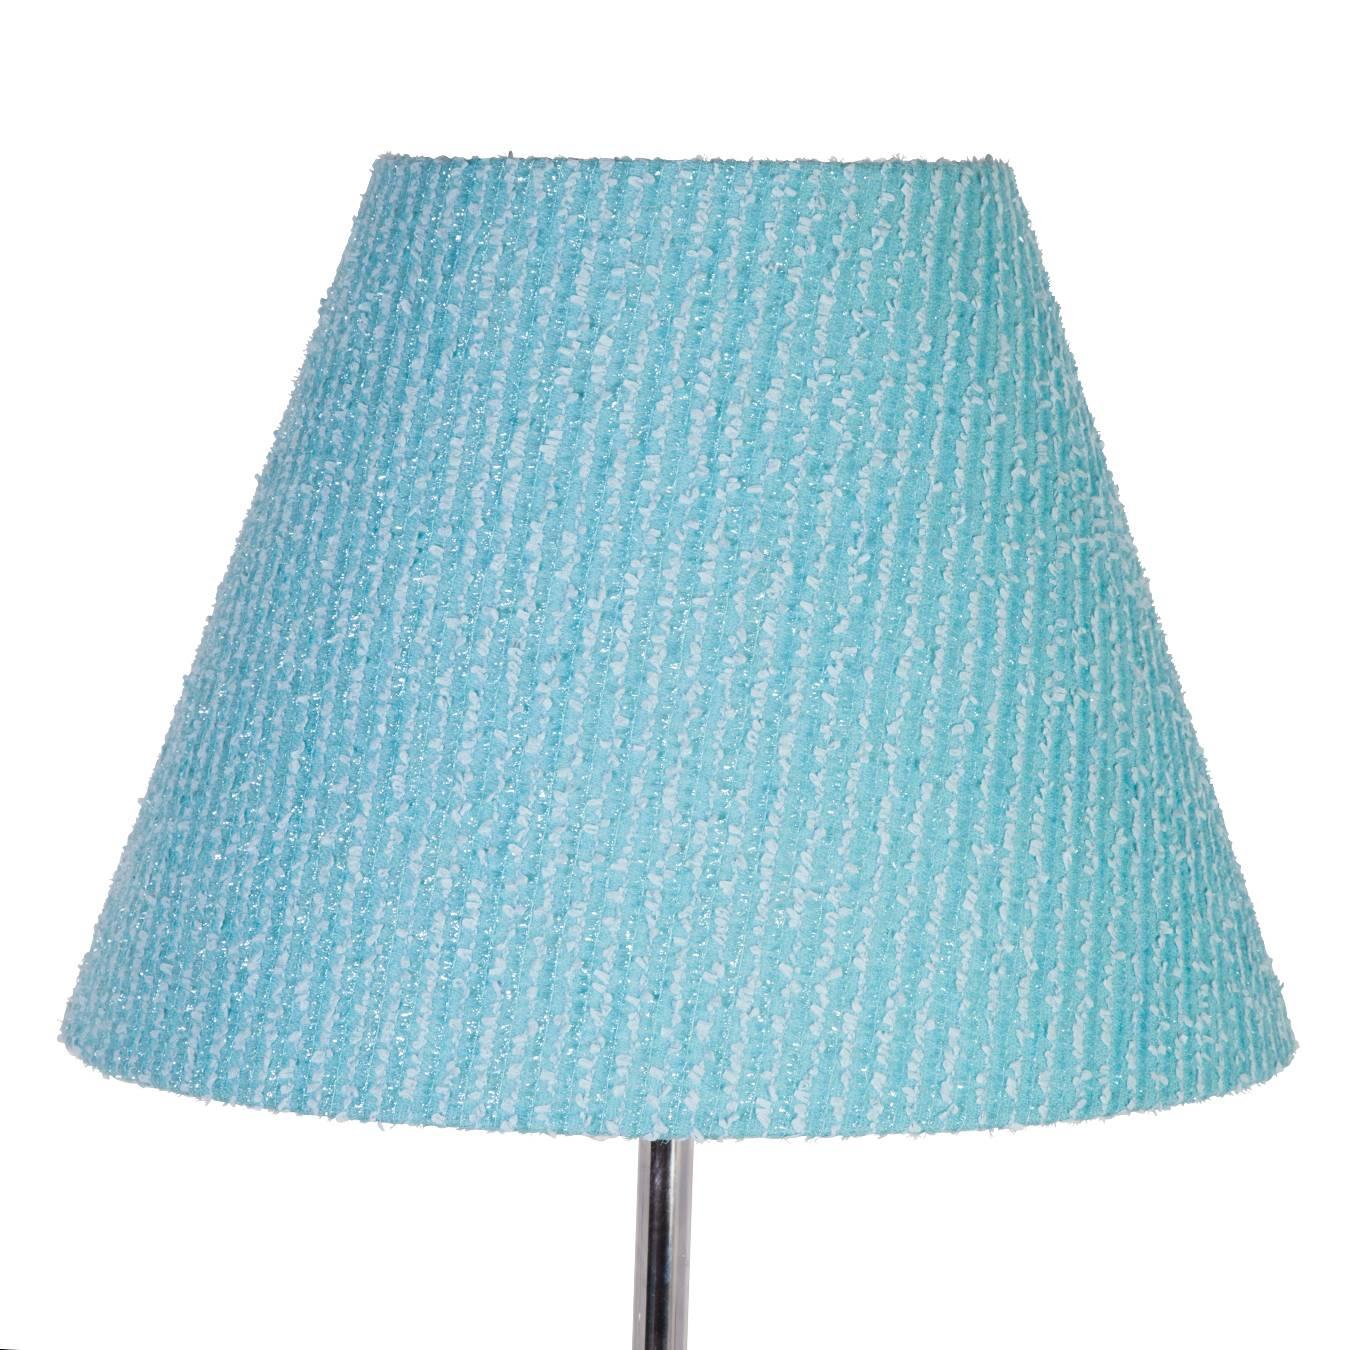 Glass fish table lamp with custom blue tweed lampshade.

Lampshade available with lamp or available separately. 

Lampshade: 16.5'' bottom; 8'' top.

Lamp: 25.25'' H x 16.5'' W x 5.5'' D

